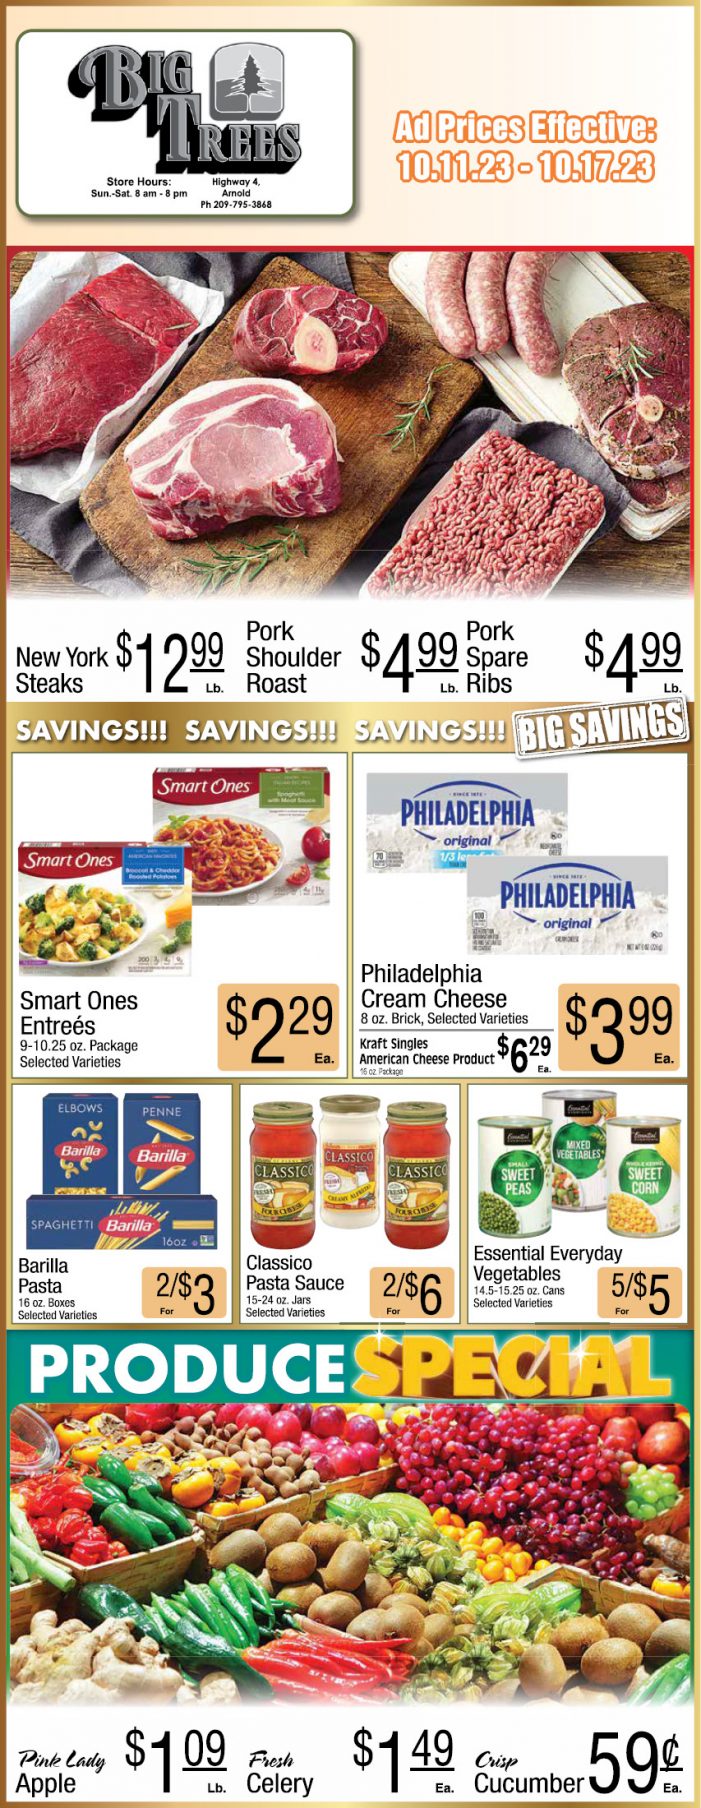 Big Trees Market Weekly Ad, Grocery, Produce, Meat & Deli Specials Through October 17th!  Shop Local & Save!